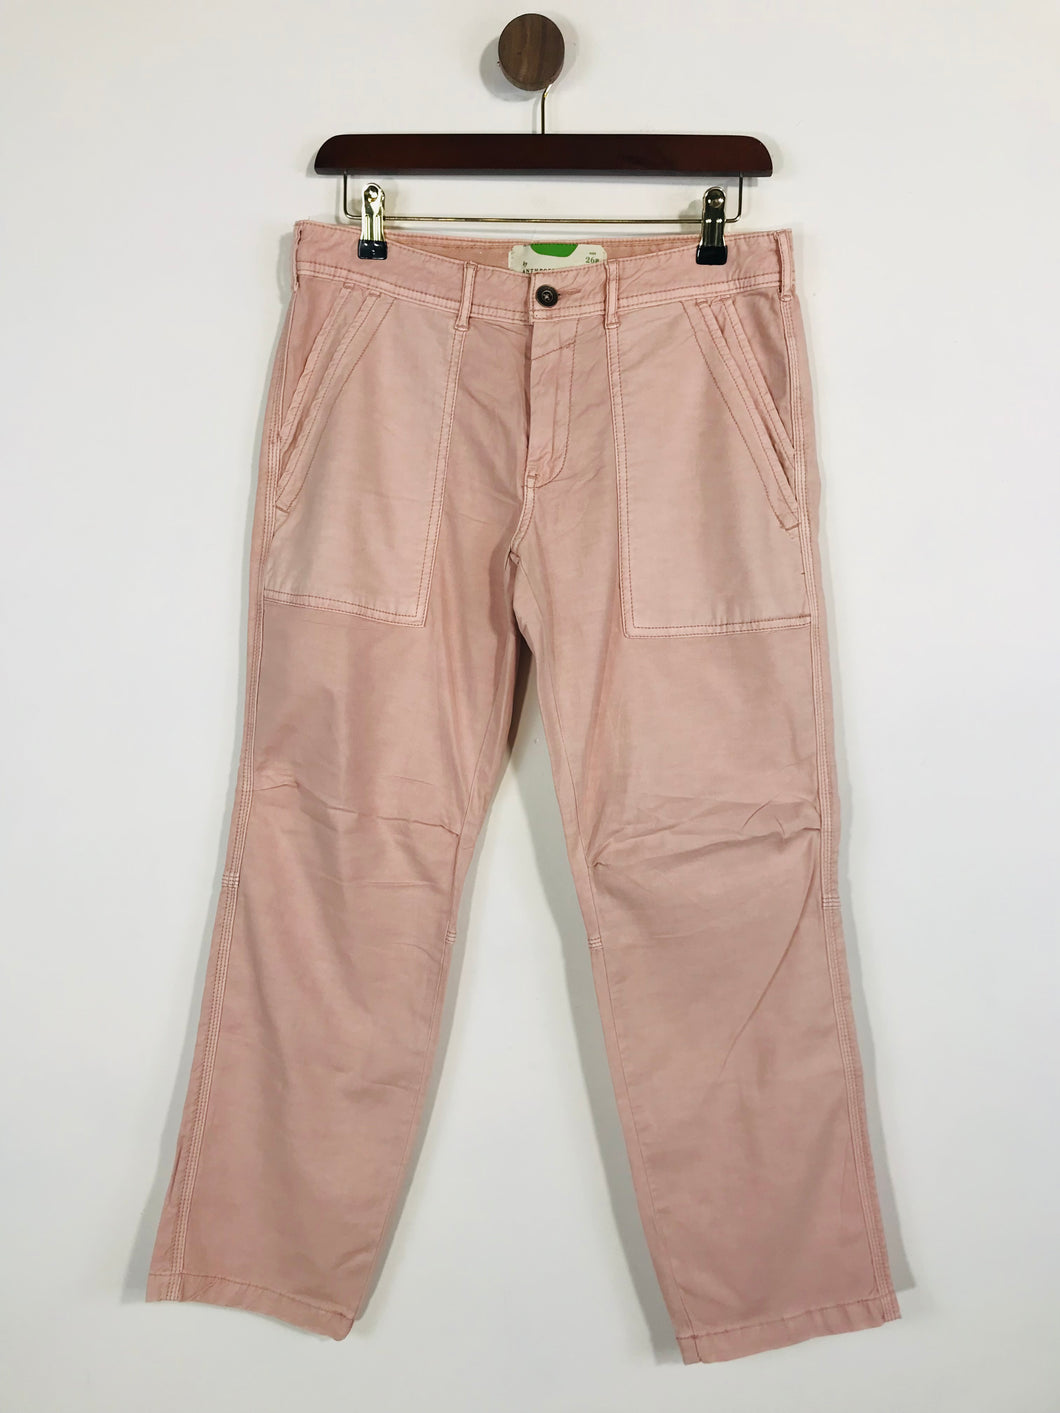 Anthropologie Women's Cargo Casual Trousers | 26 UK8 | Pink